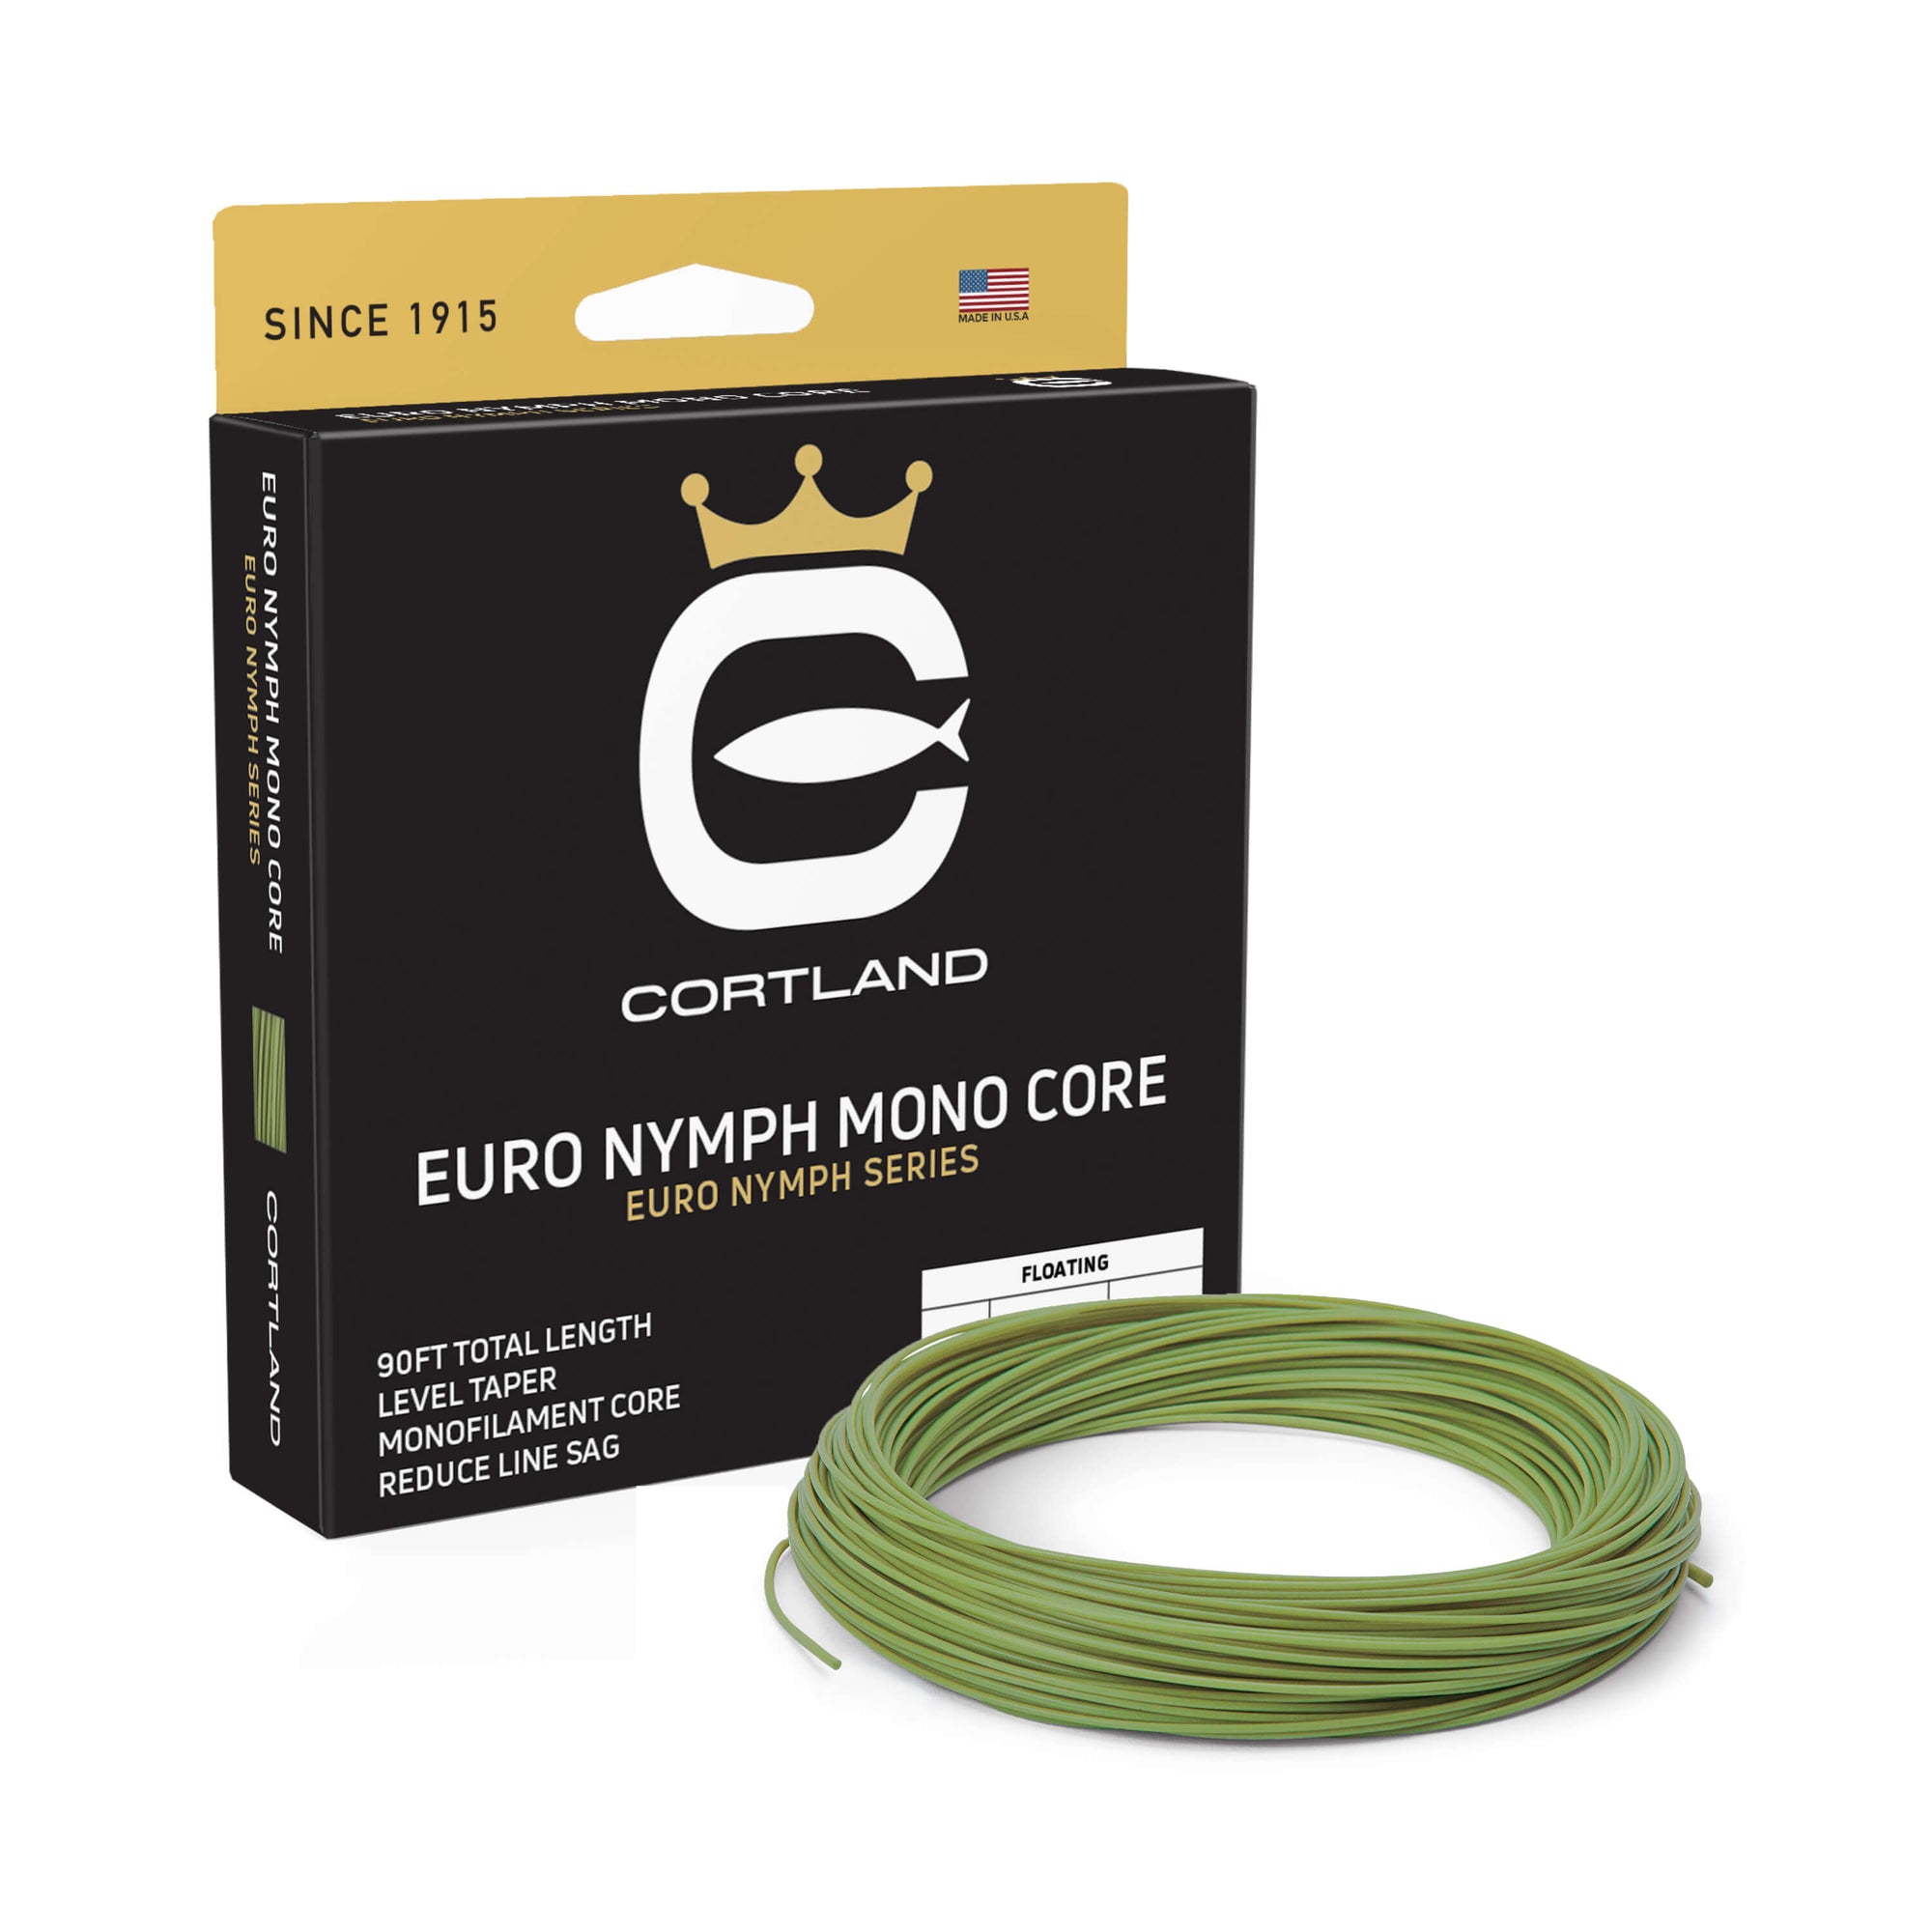 Euro Nymph Mono Core Fly Line and Box. The coil is gecko green. The box has the Cortland logo, and is black and bronze